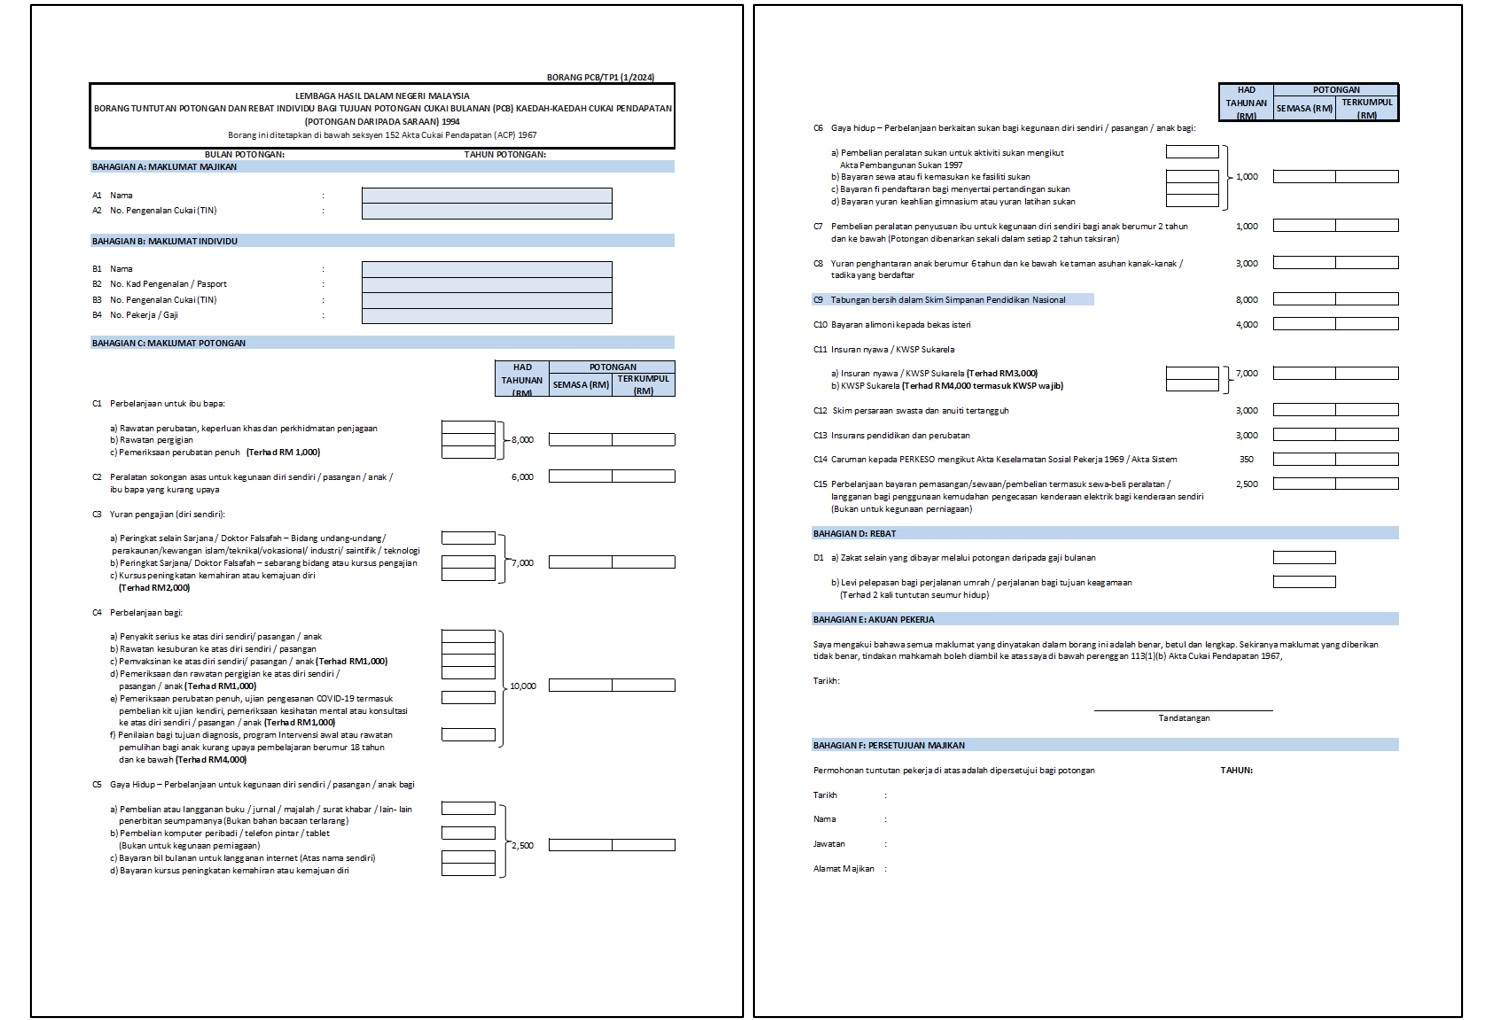 An overview of the TP1 Form.